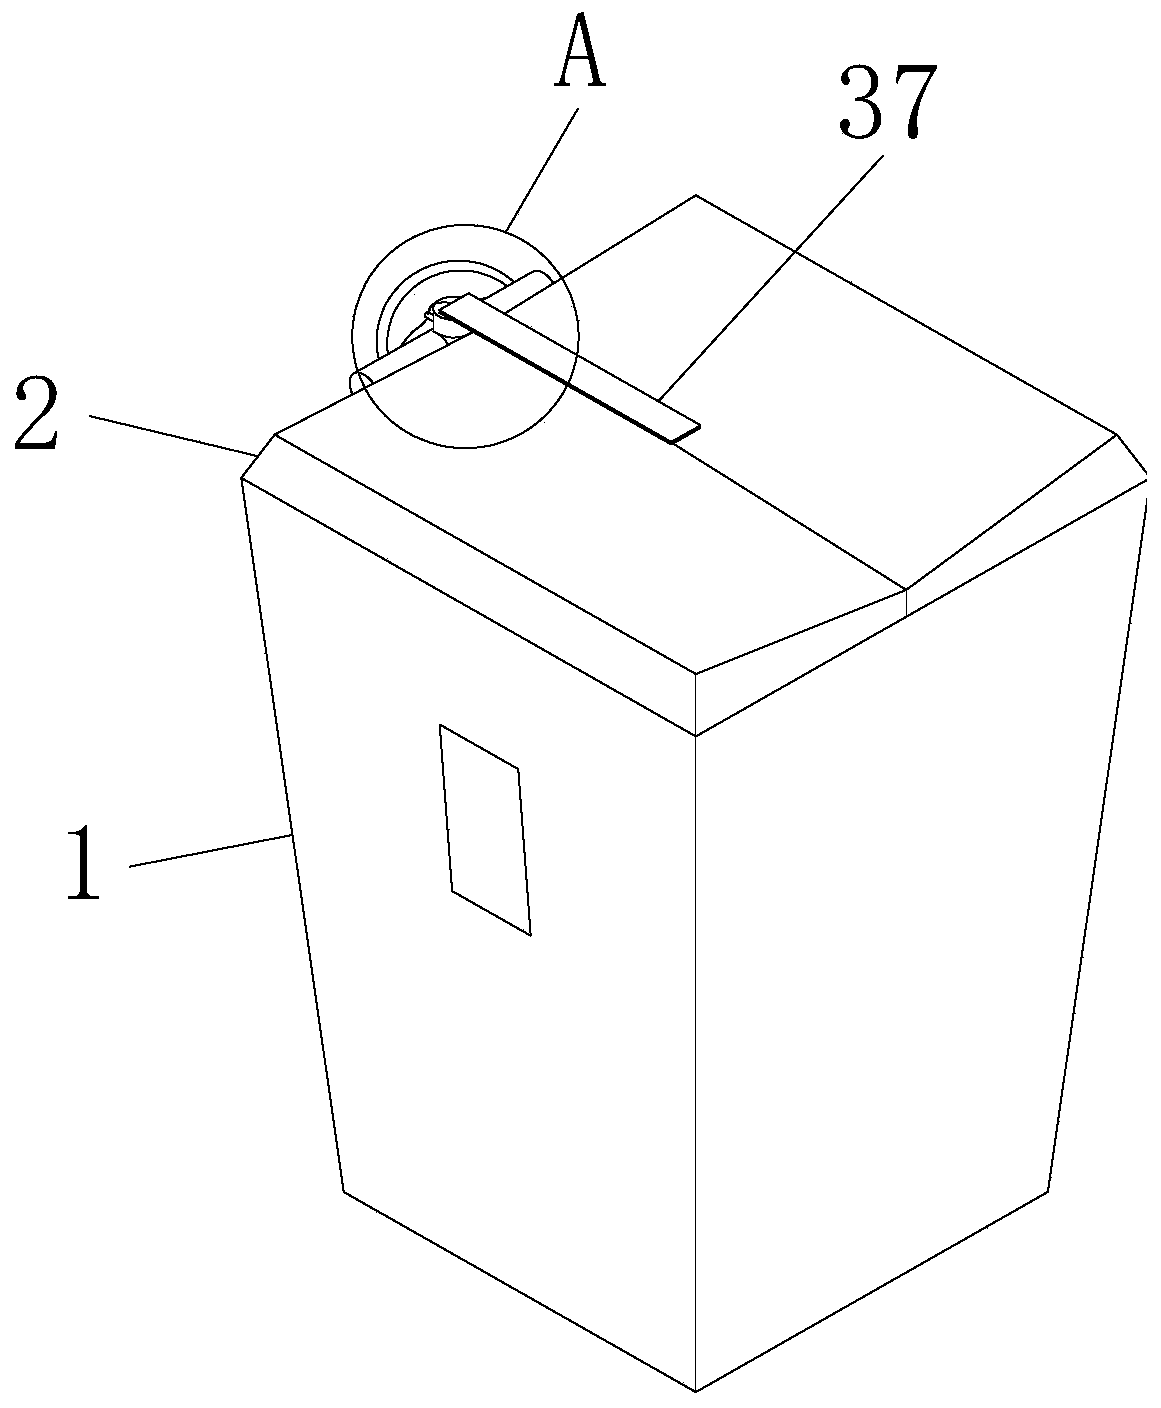 Paper waste collecting device